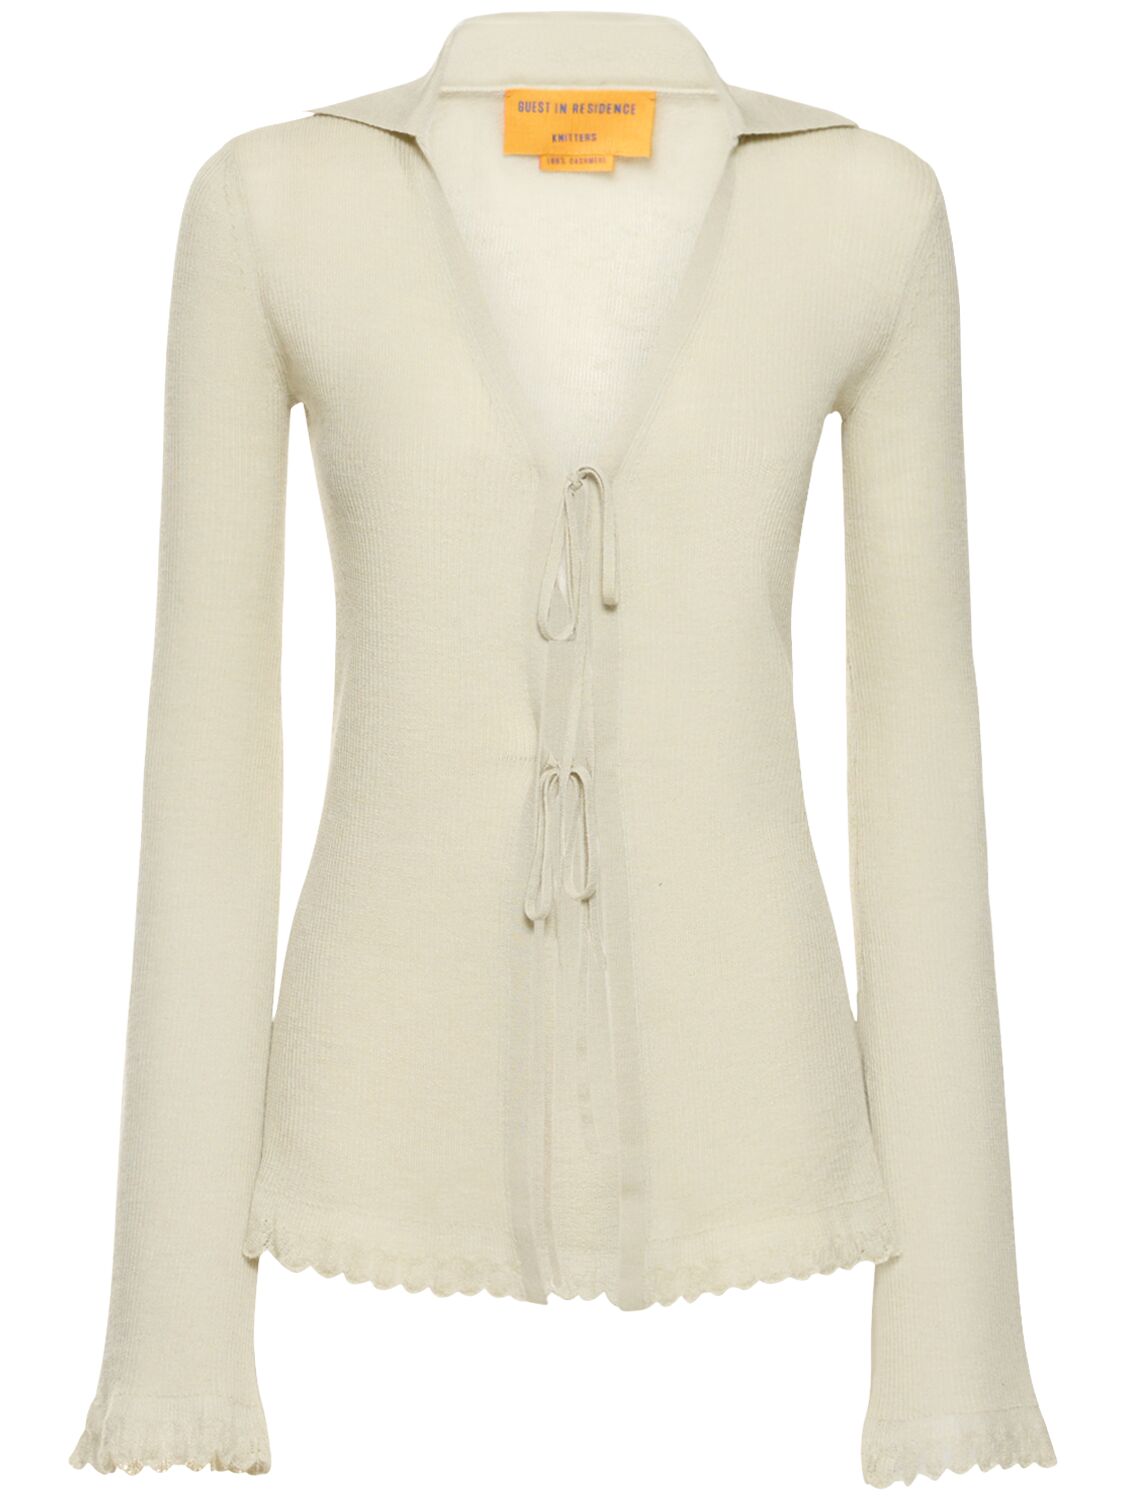 Cardigan Lvr Exclusive In Cashmere - GUEST IN RESIDENCE - Modalova